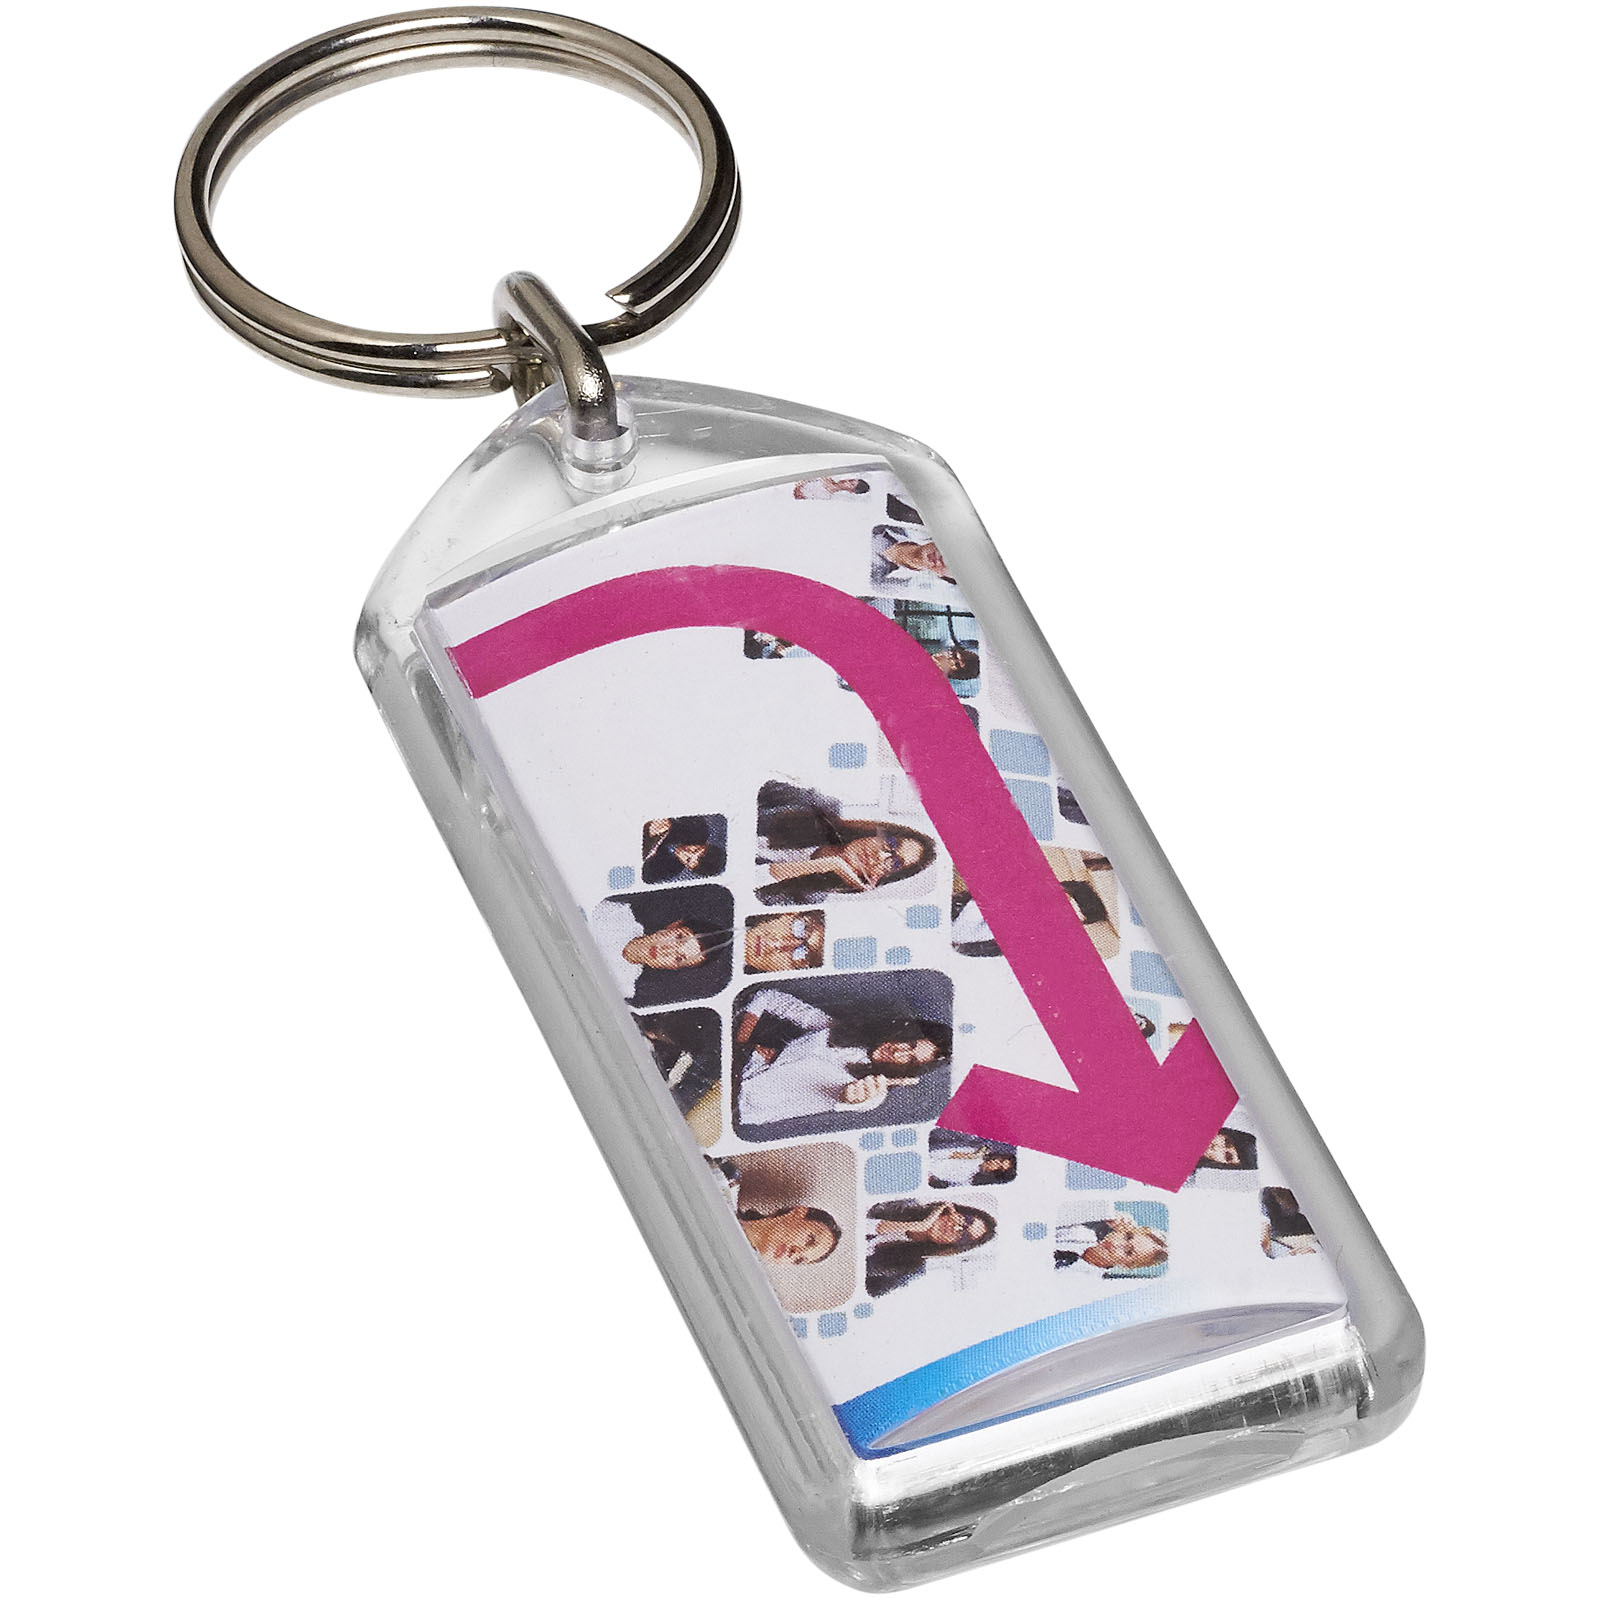 Giveaways - Stein F1 reopenable keychain